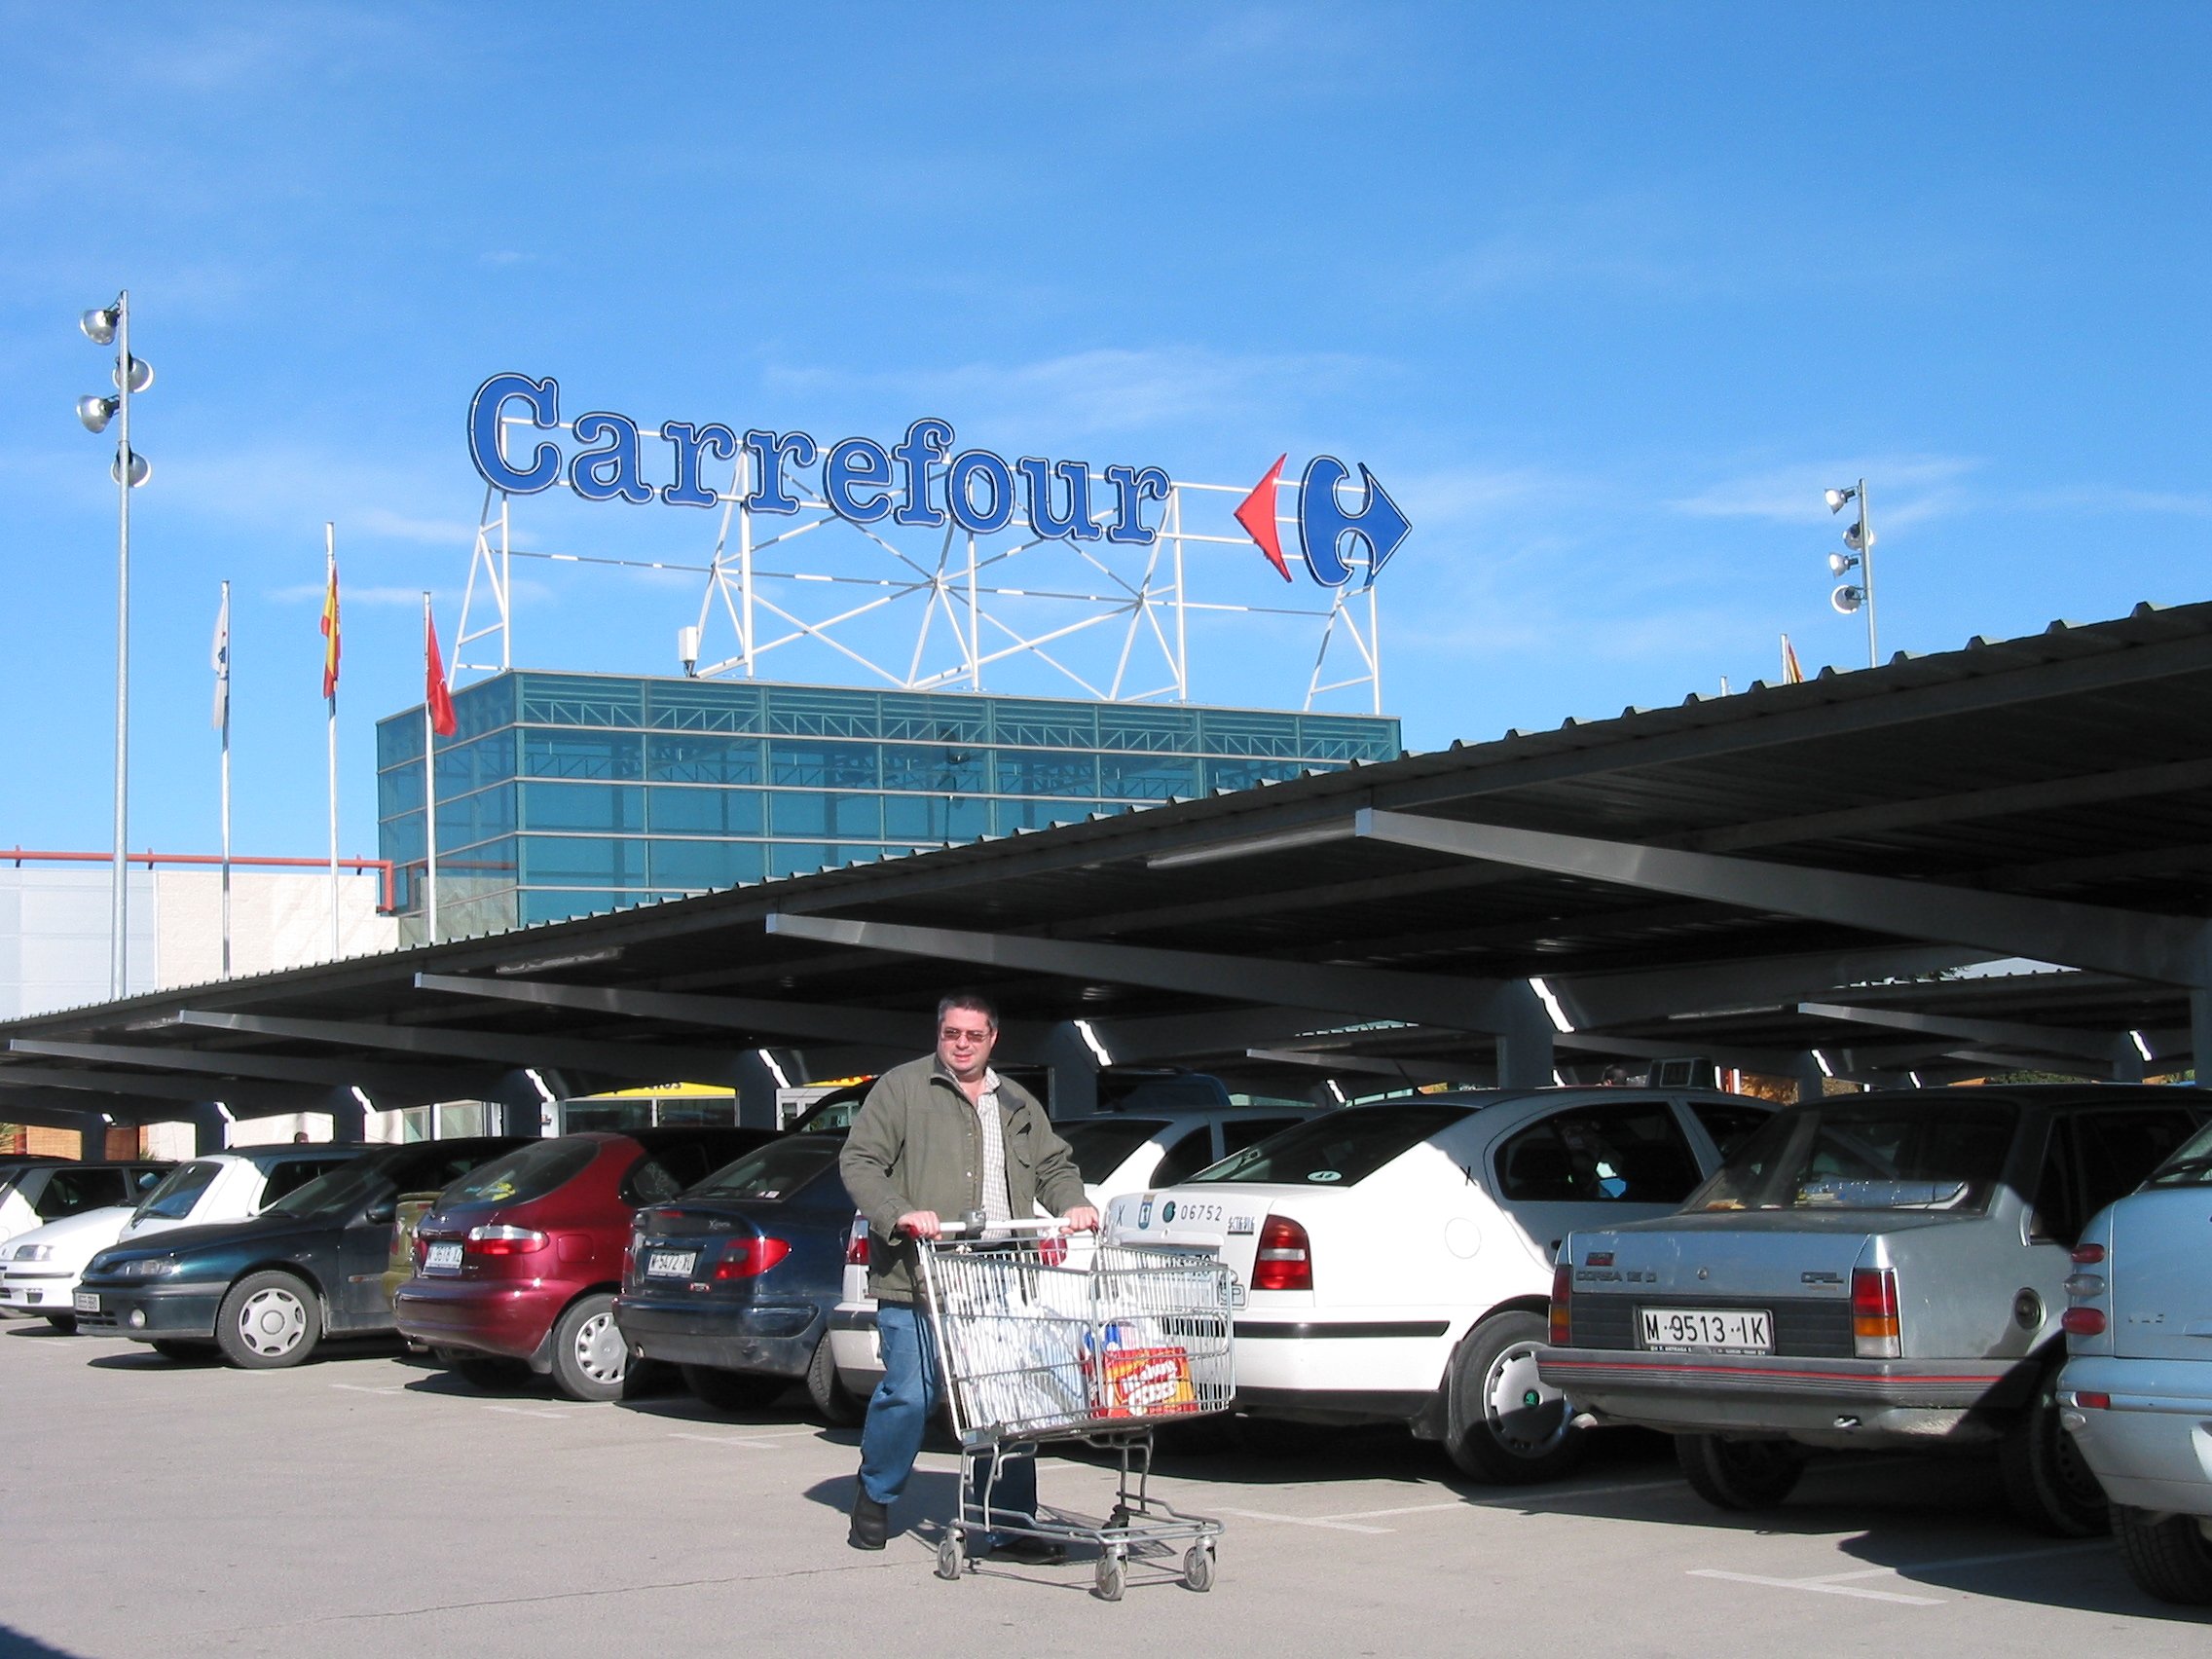 Retailer Carrefour in Spain steps up solar panel installations at its stores